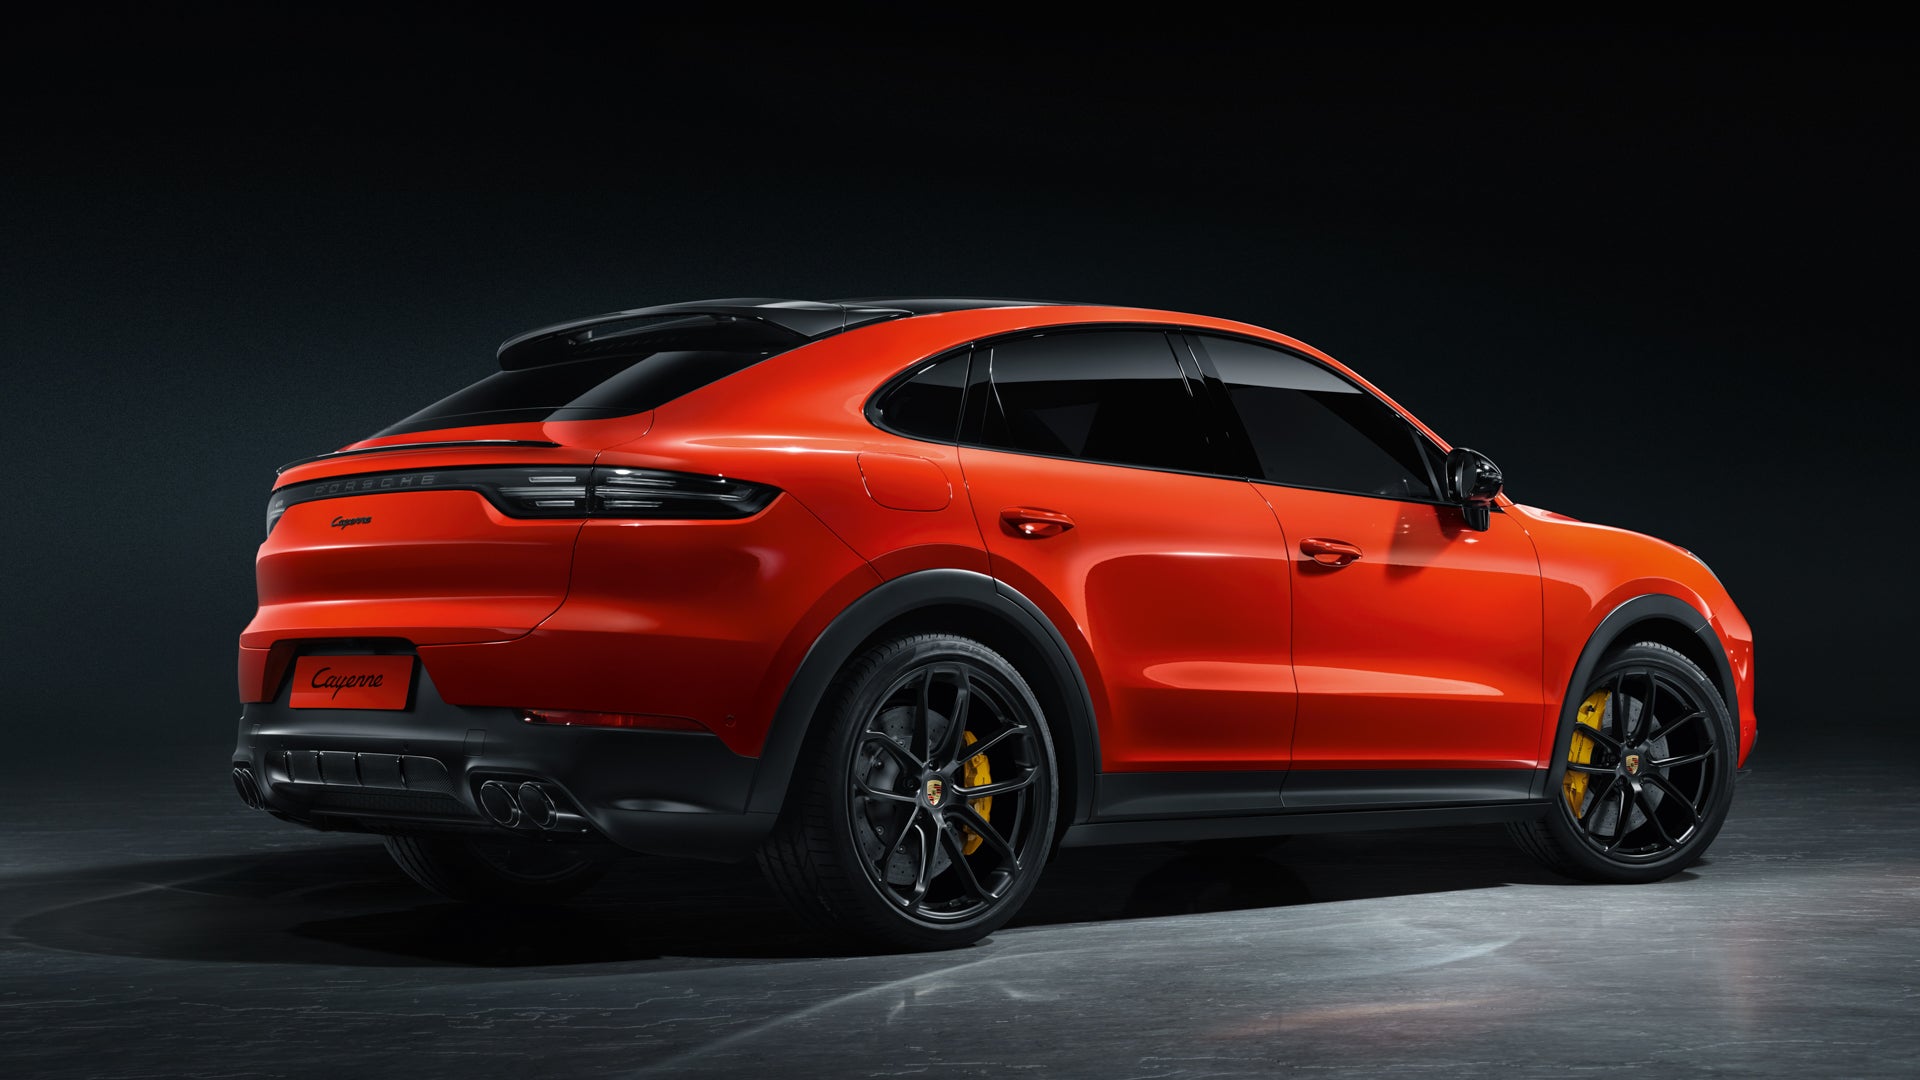 Big Porsche Electric SUV Is Coming With Off-Road Suspension, 400+ Mile Range: Report